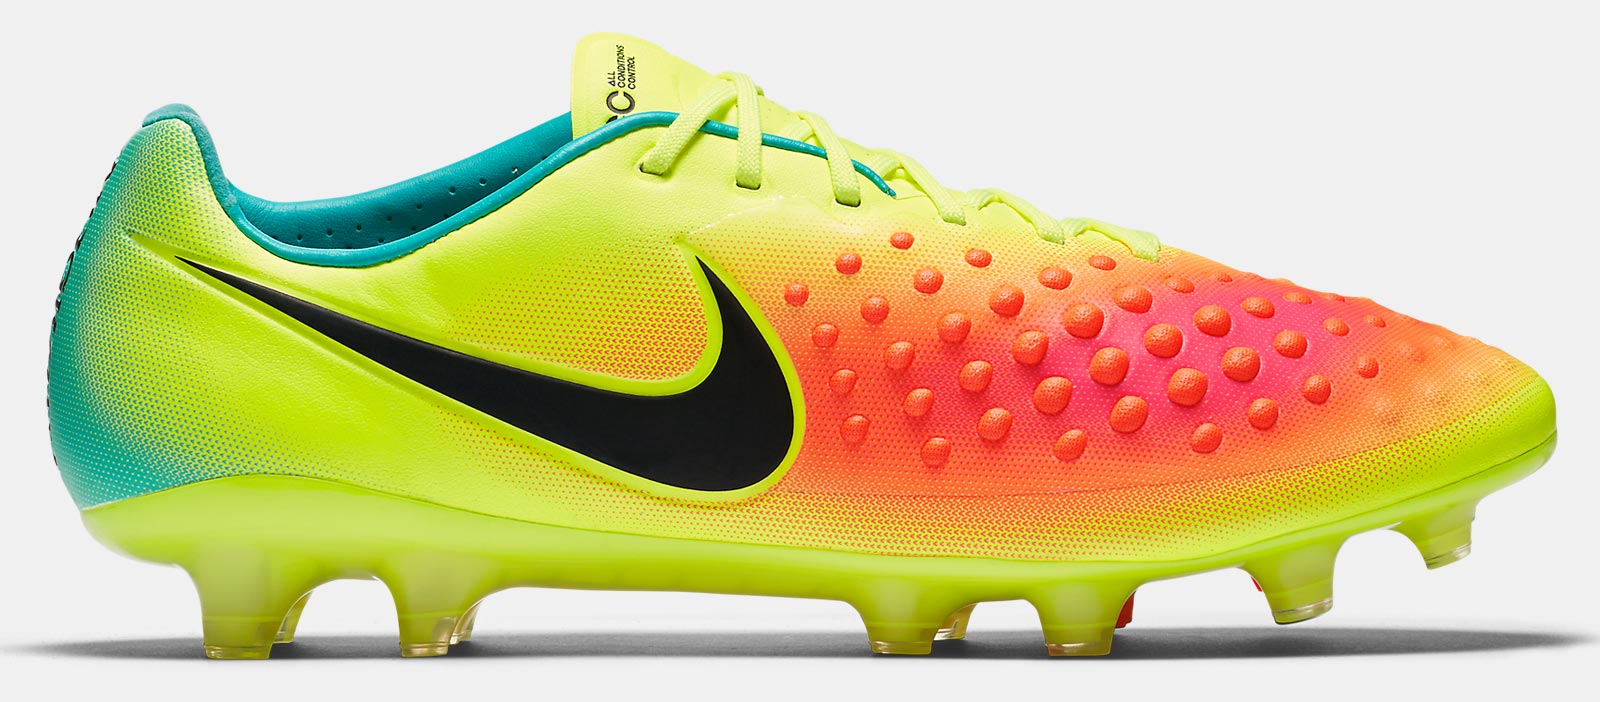 cheap nike magista soccer cleats sale Up to 39% Discounts